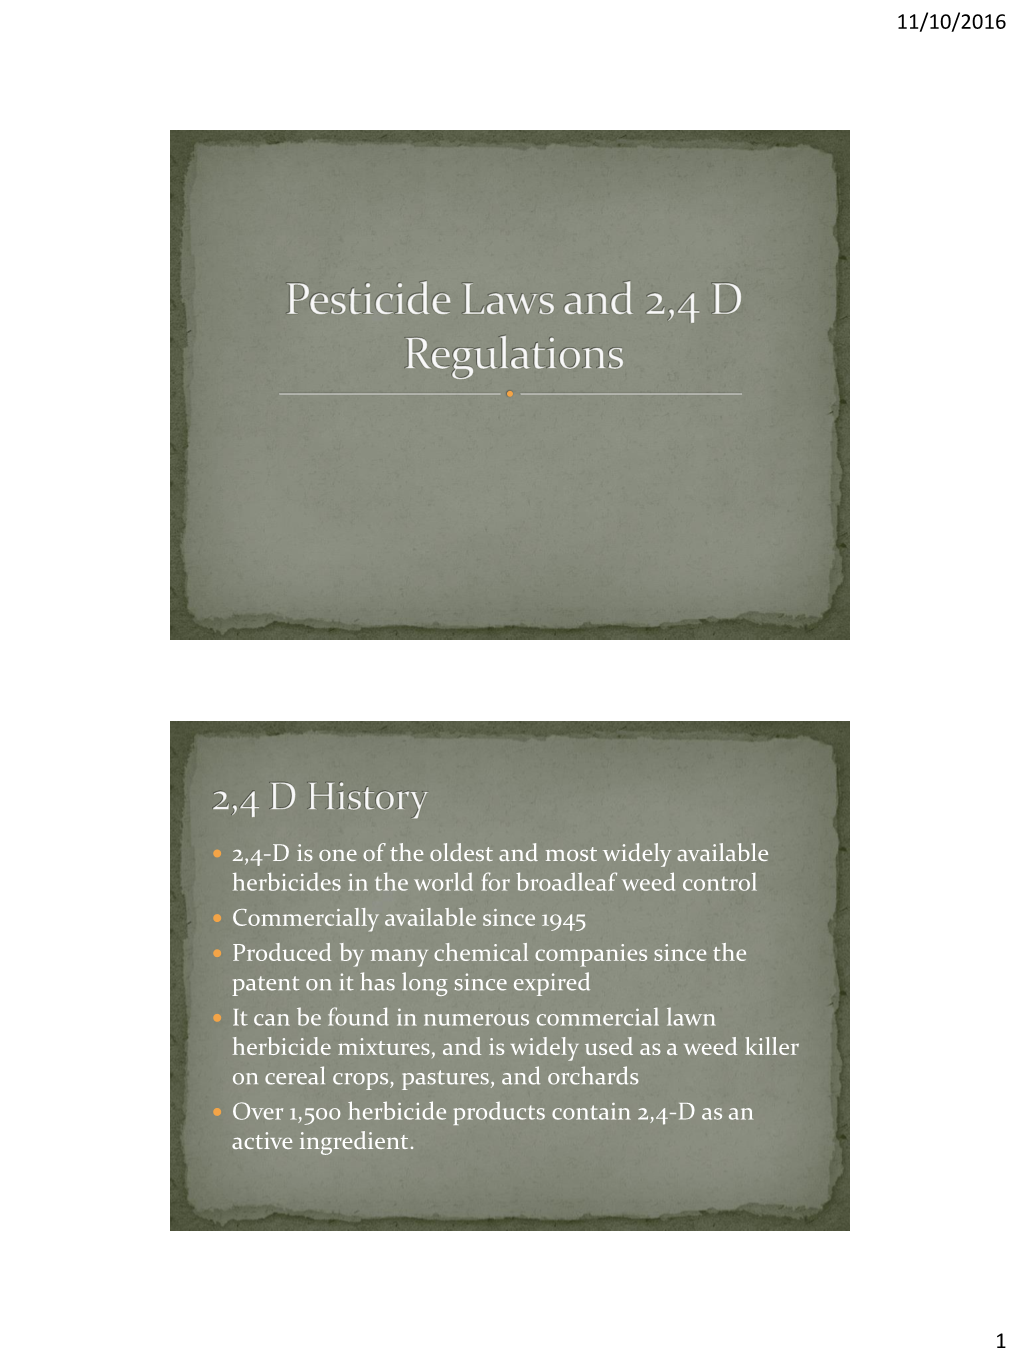 Pesticide Laws and 2,4 D Regulations